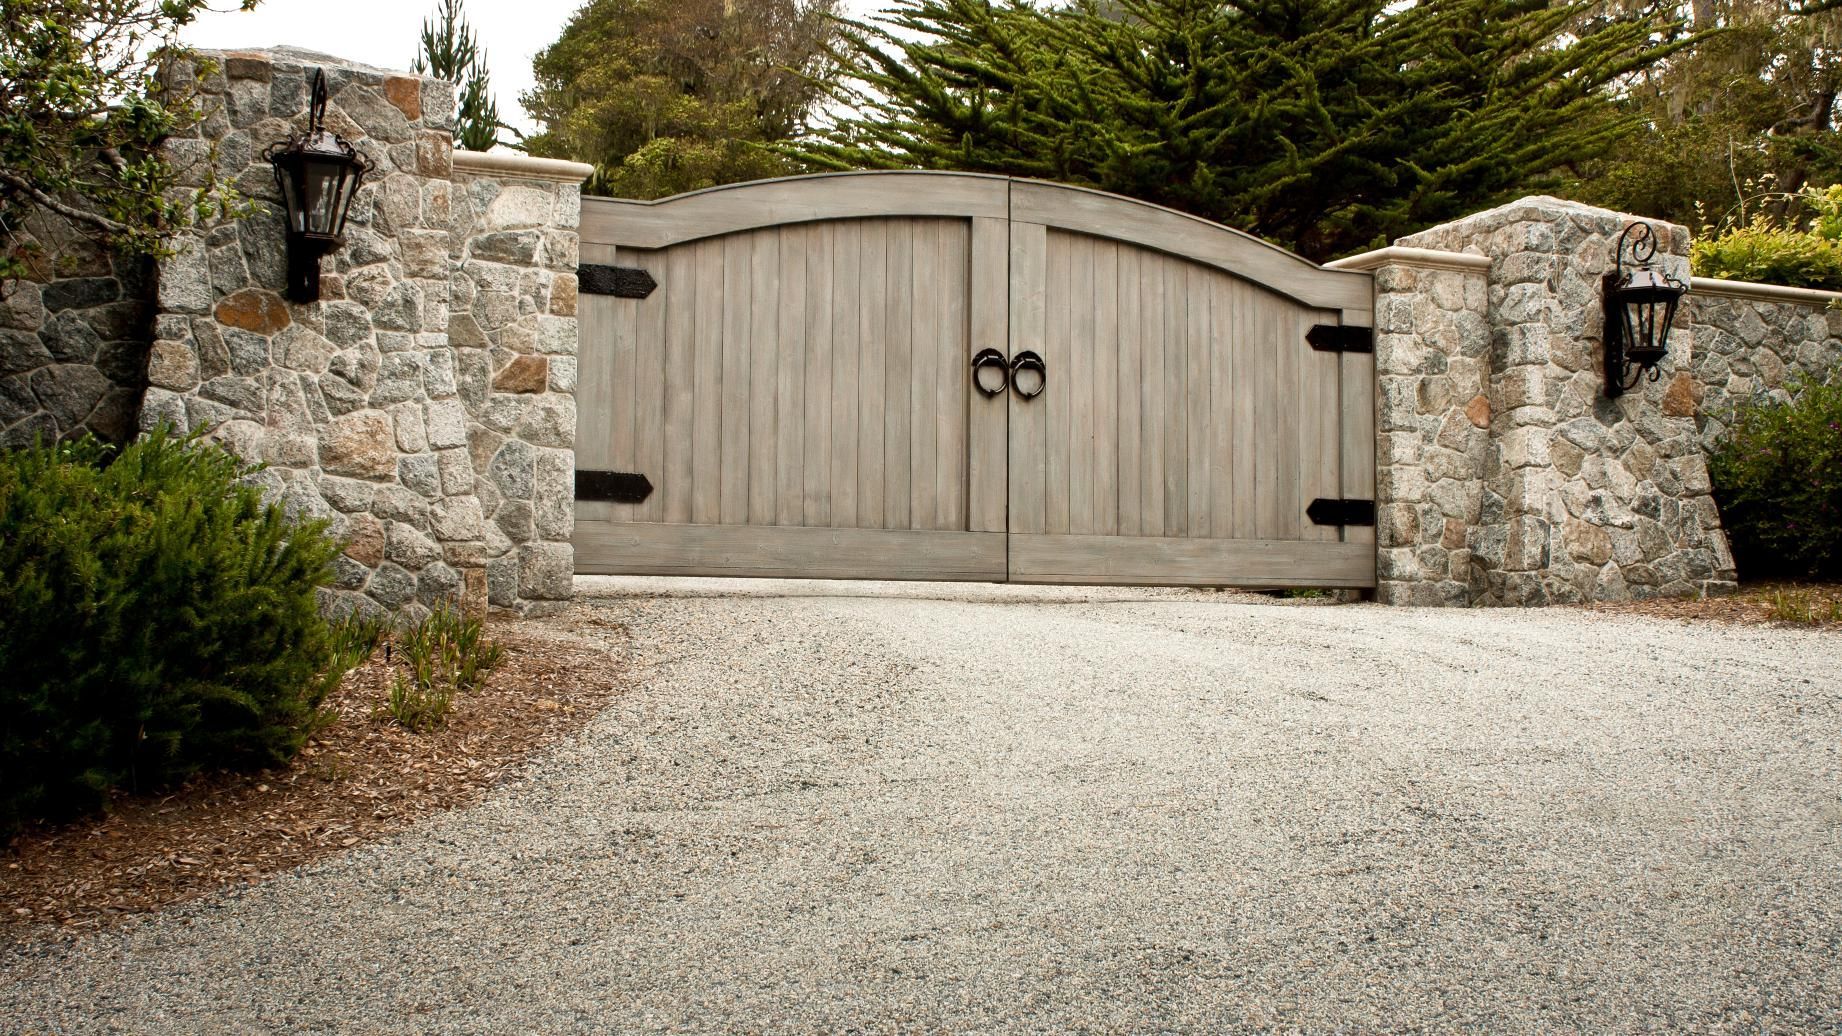 A wooden gate is surrounded by a stone wall and gravel driveway.